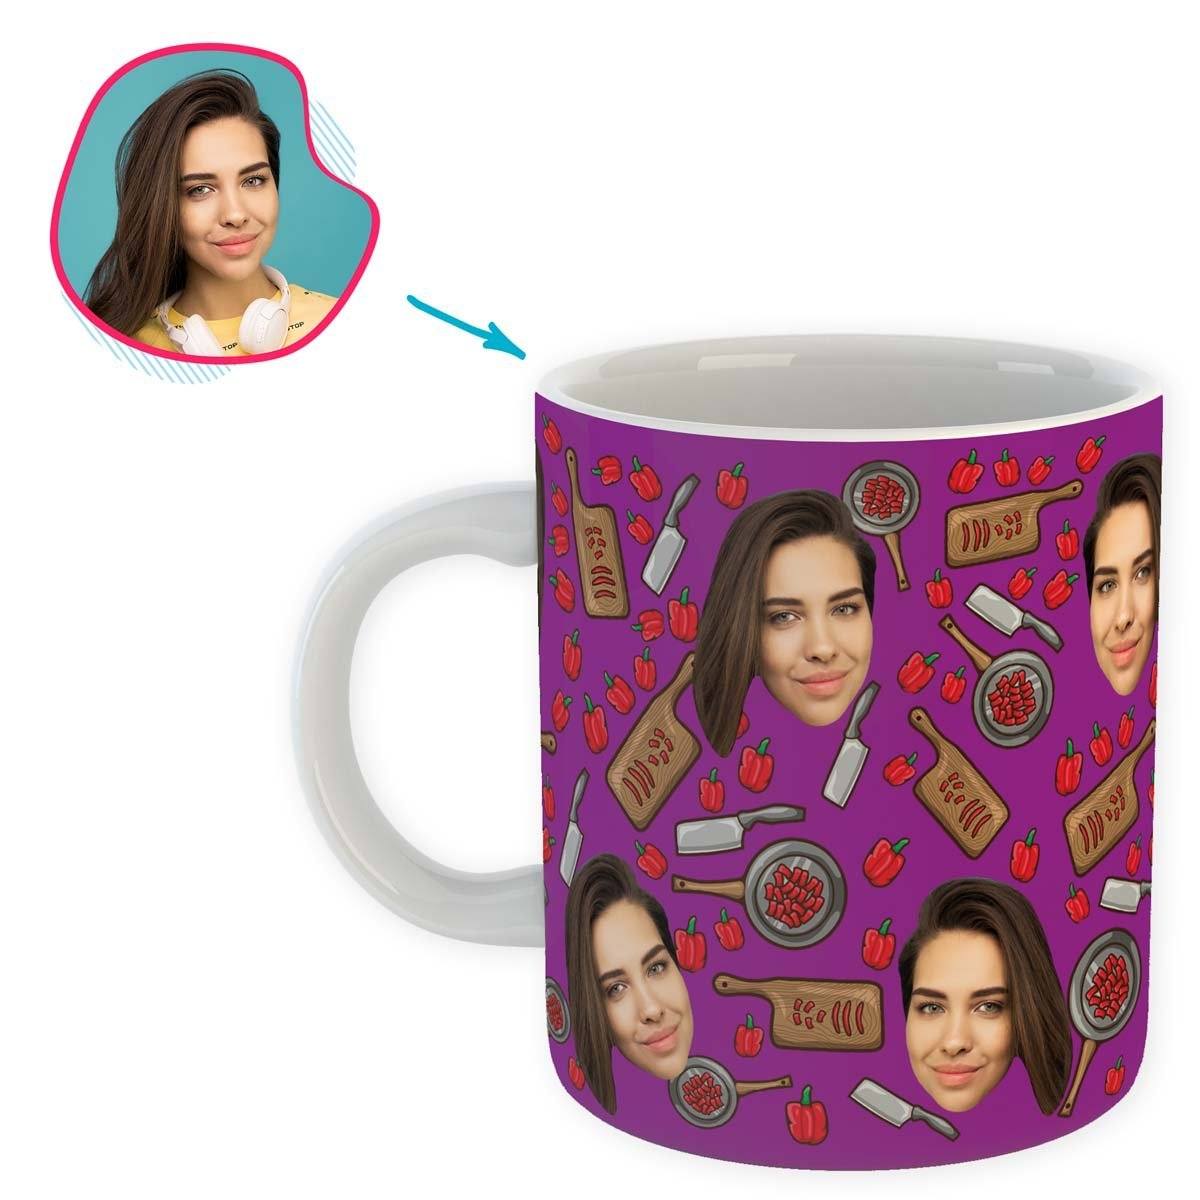 purple Сooking mug personalized with photo of face printed on it